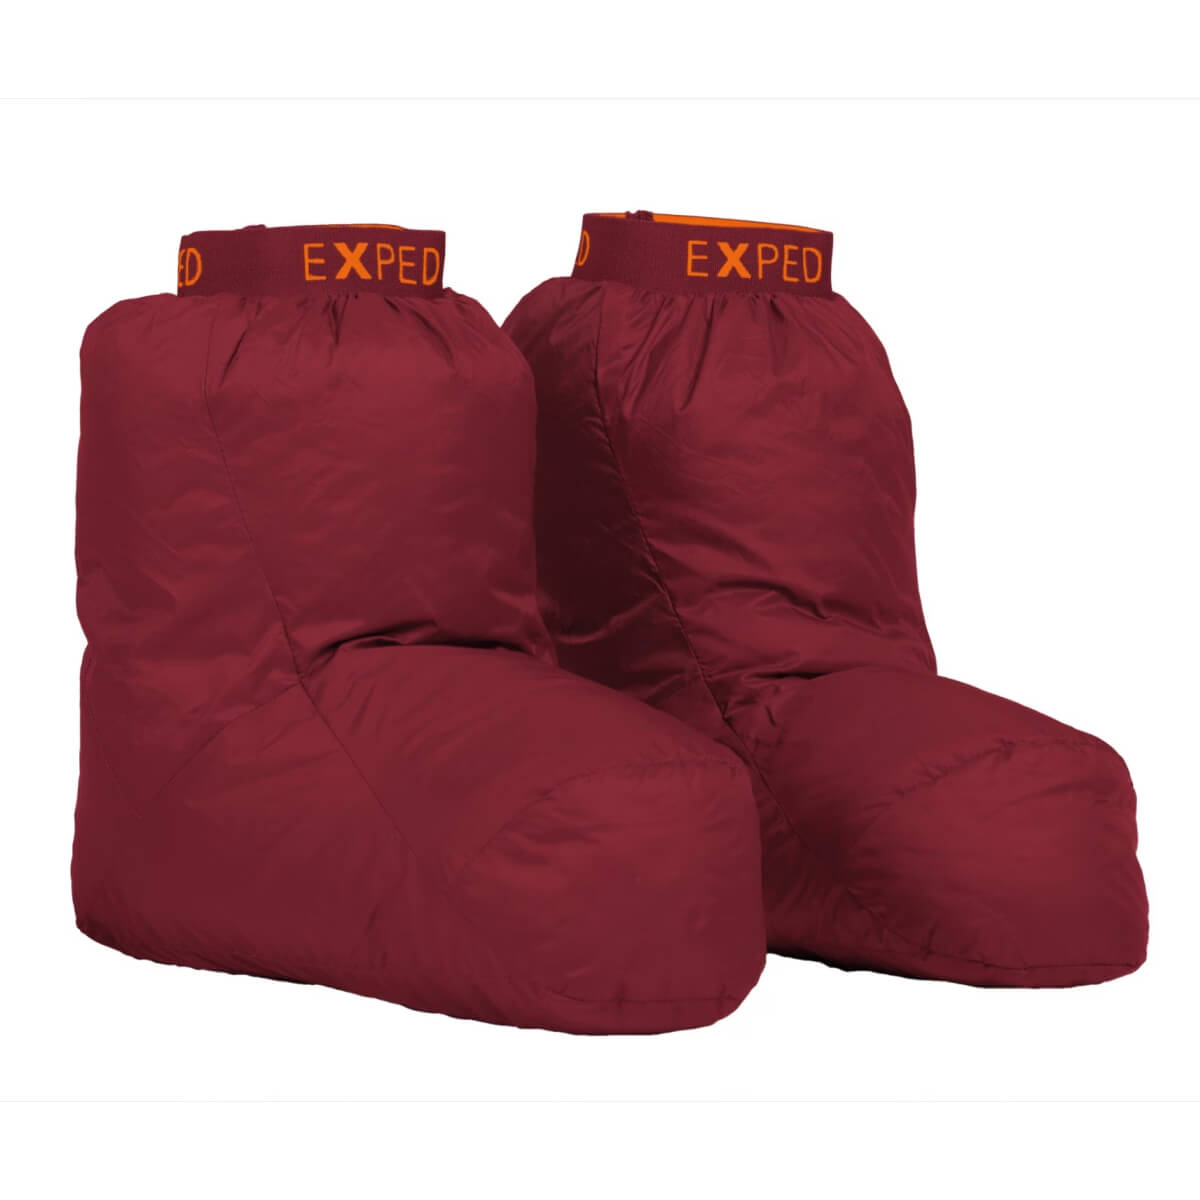 Exped Down Socks